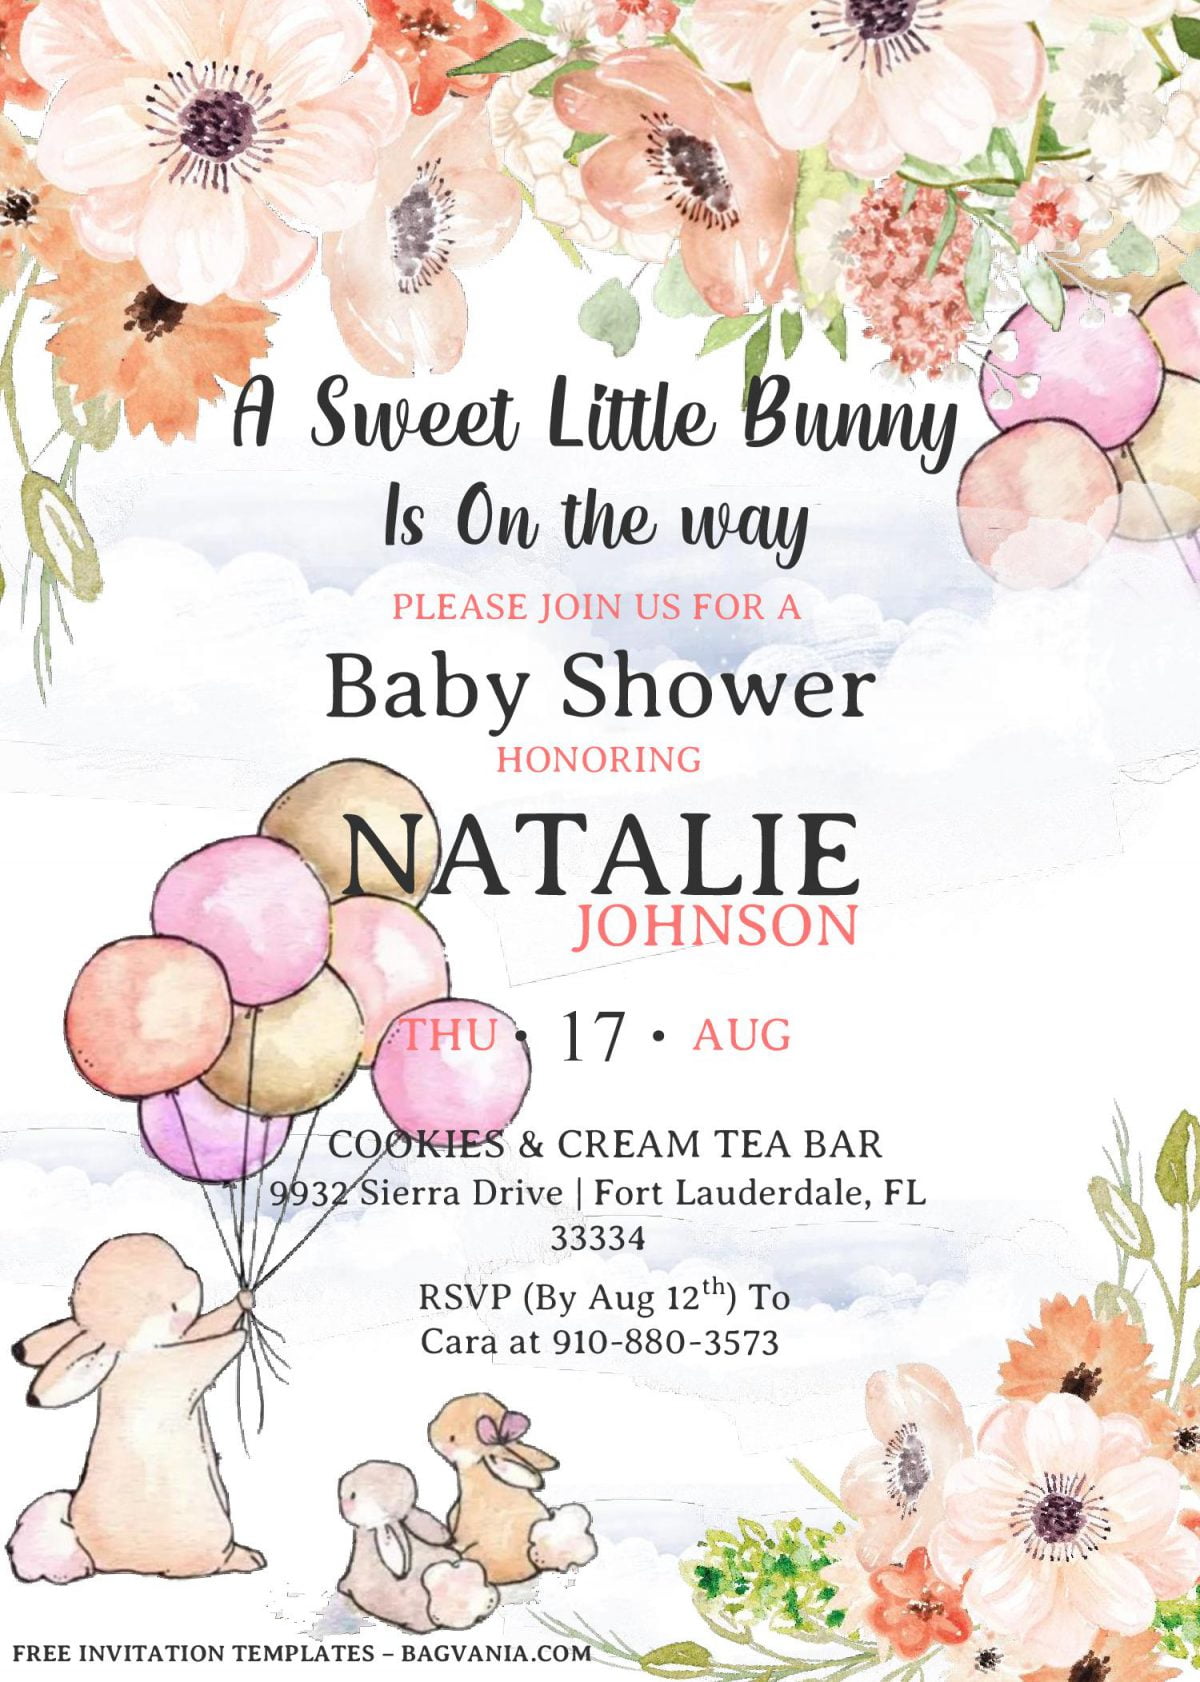 Some Bunny Invitation Templates - Editable With MS Word and has aesthetic fonts